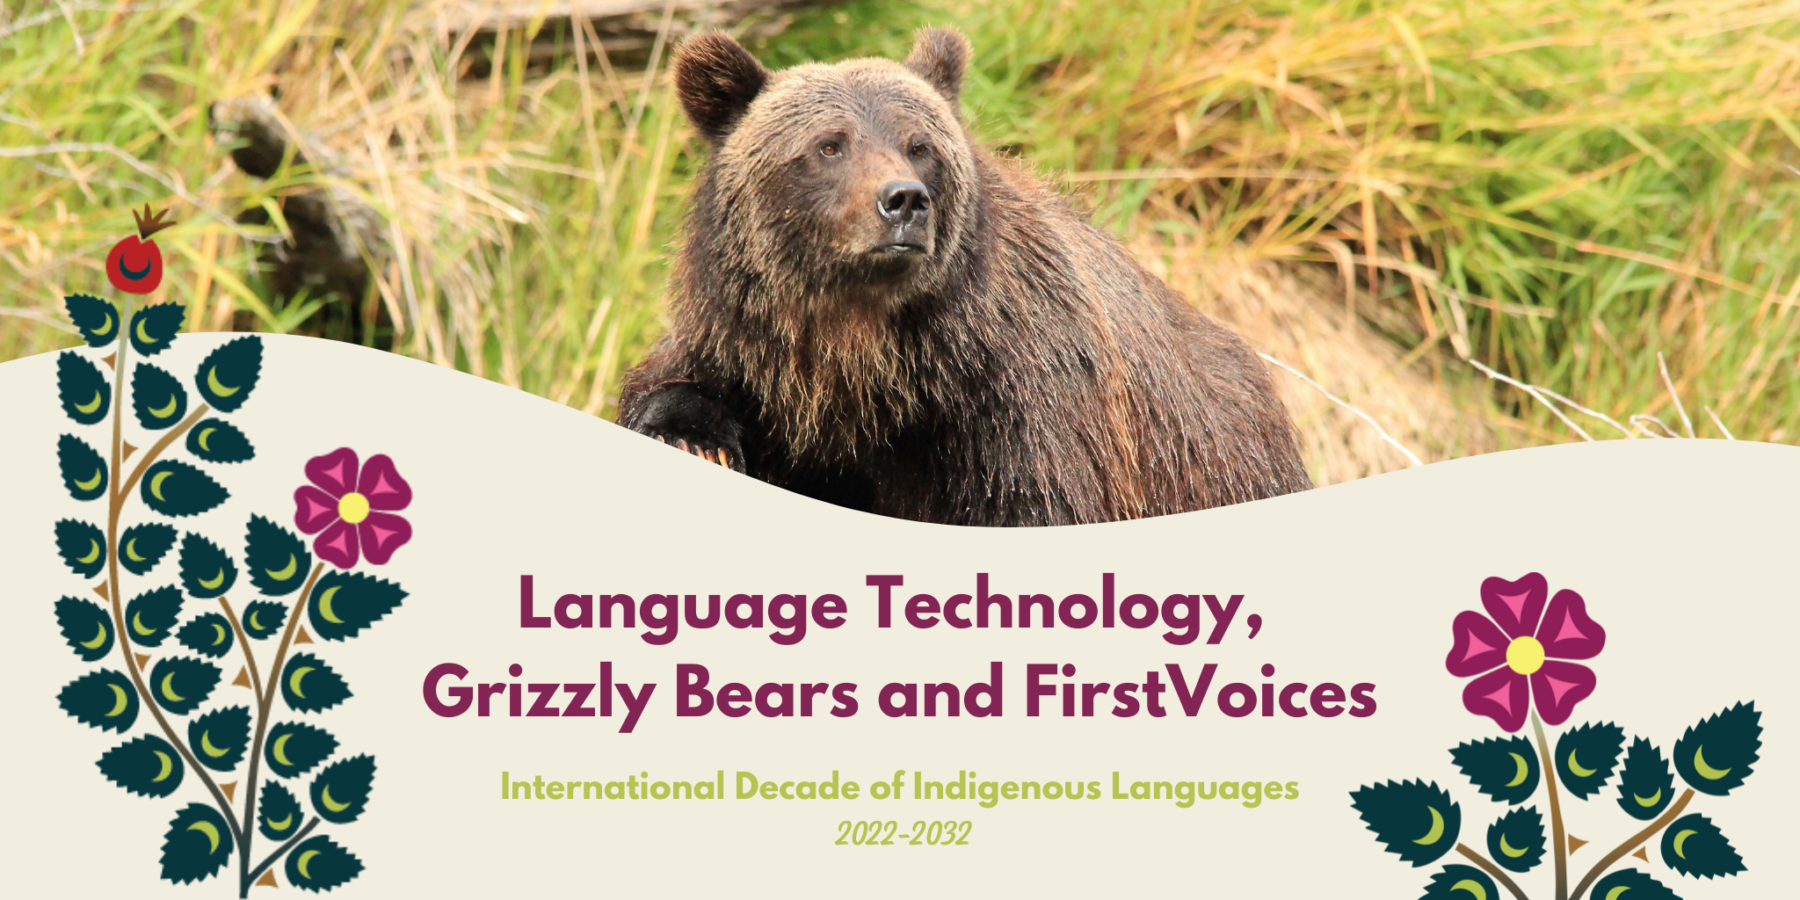 St̓át̓imc Grizzly Bear featured for story on FirstVoices